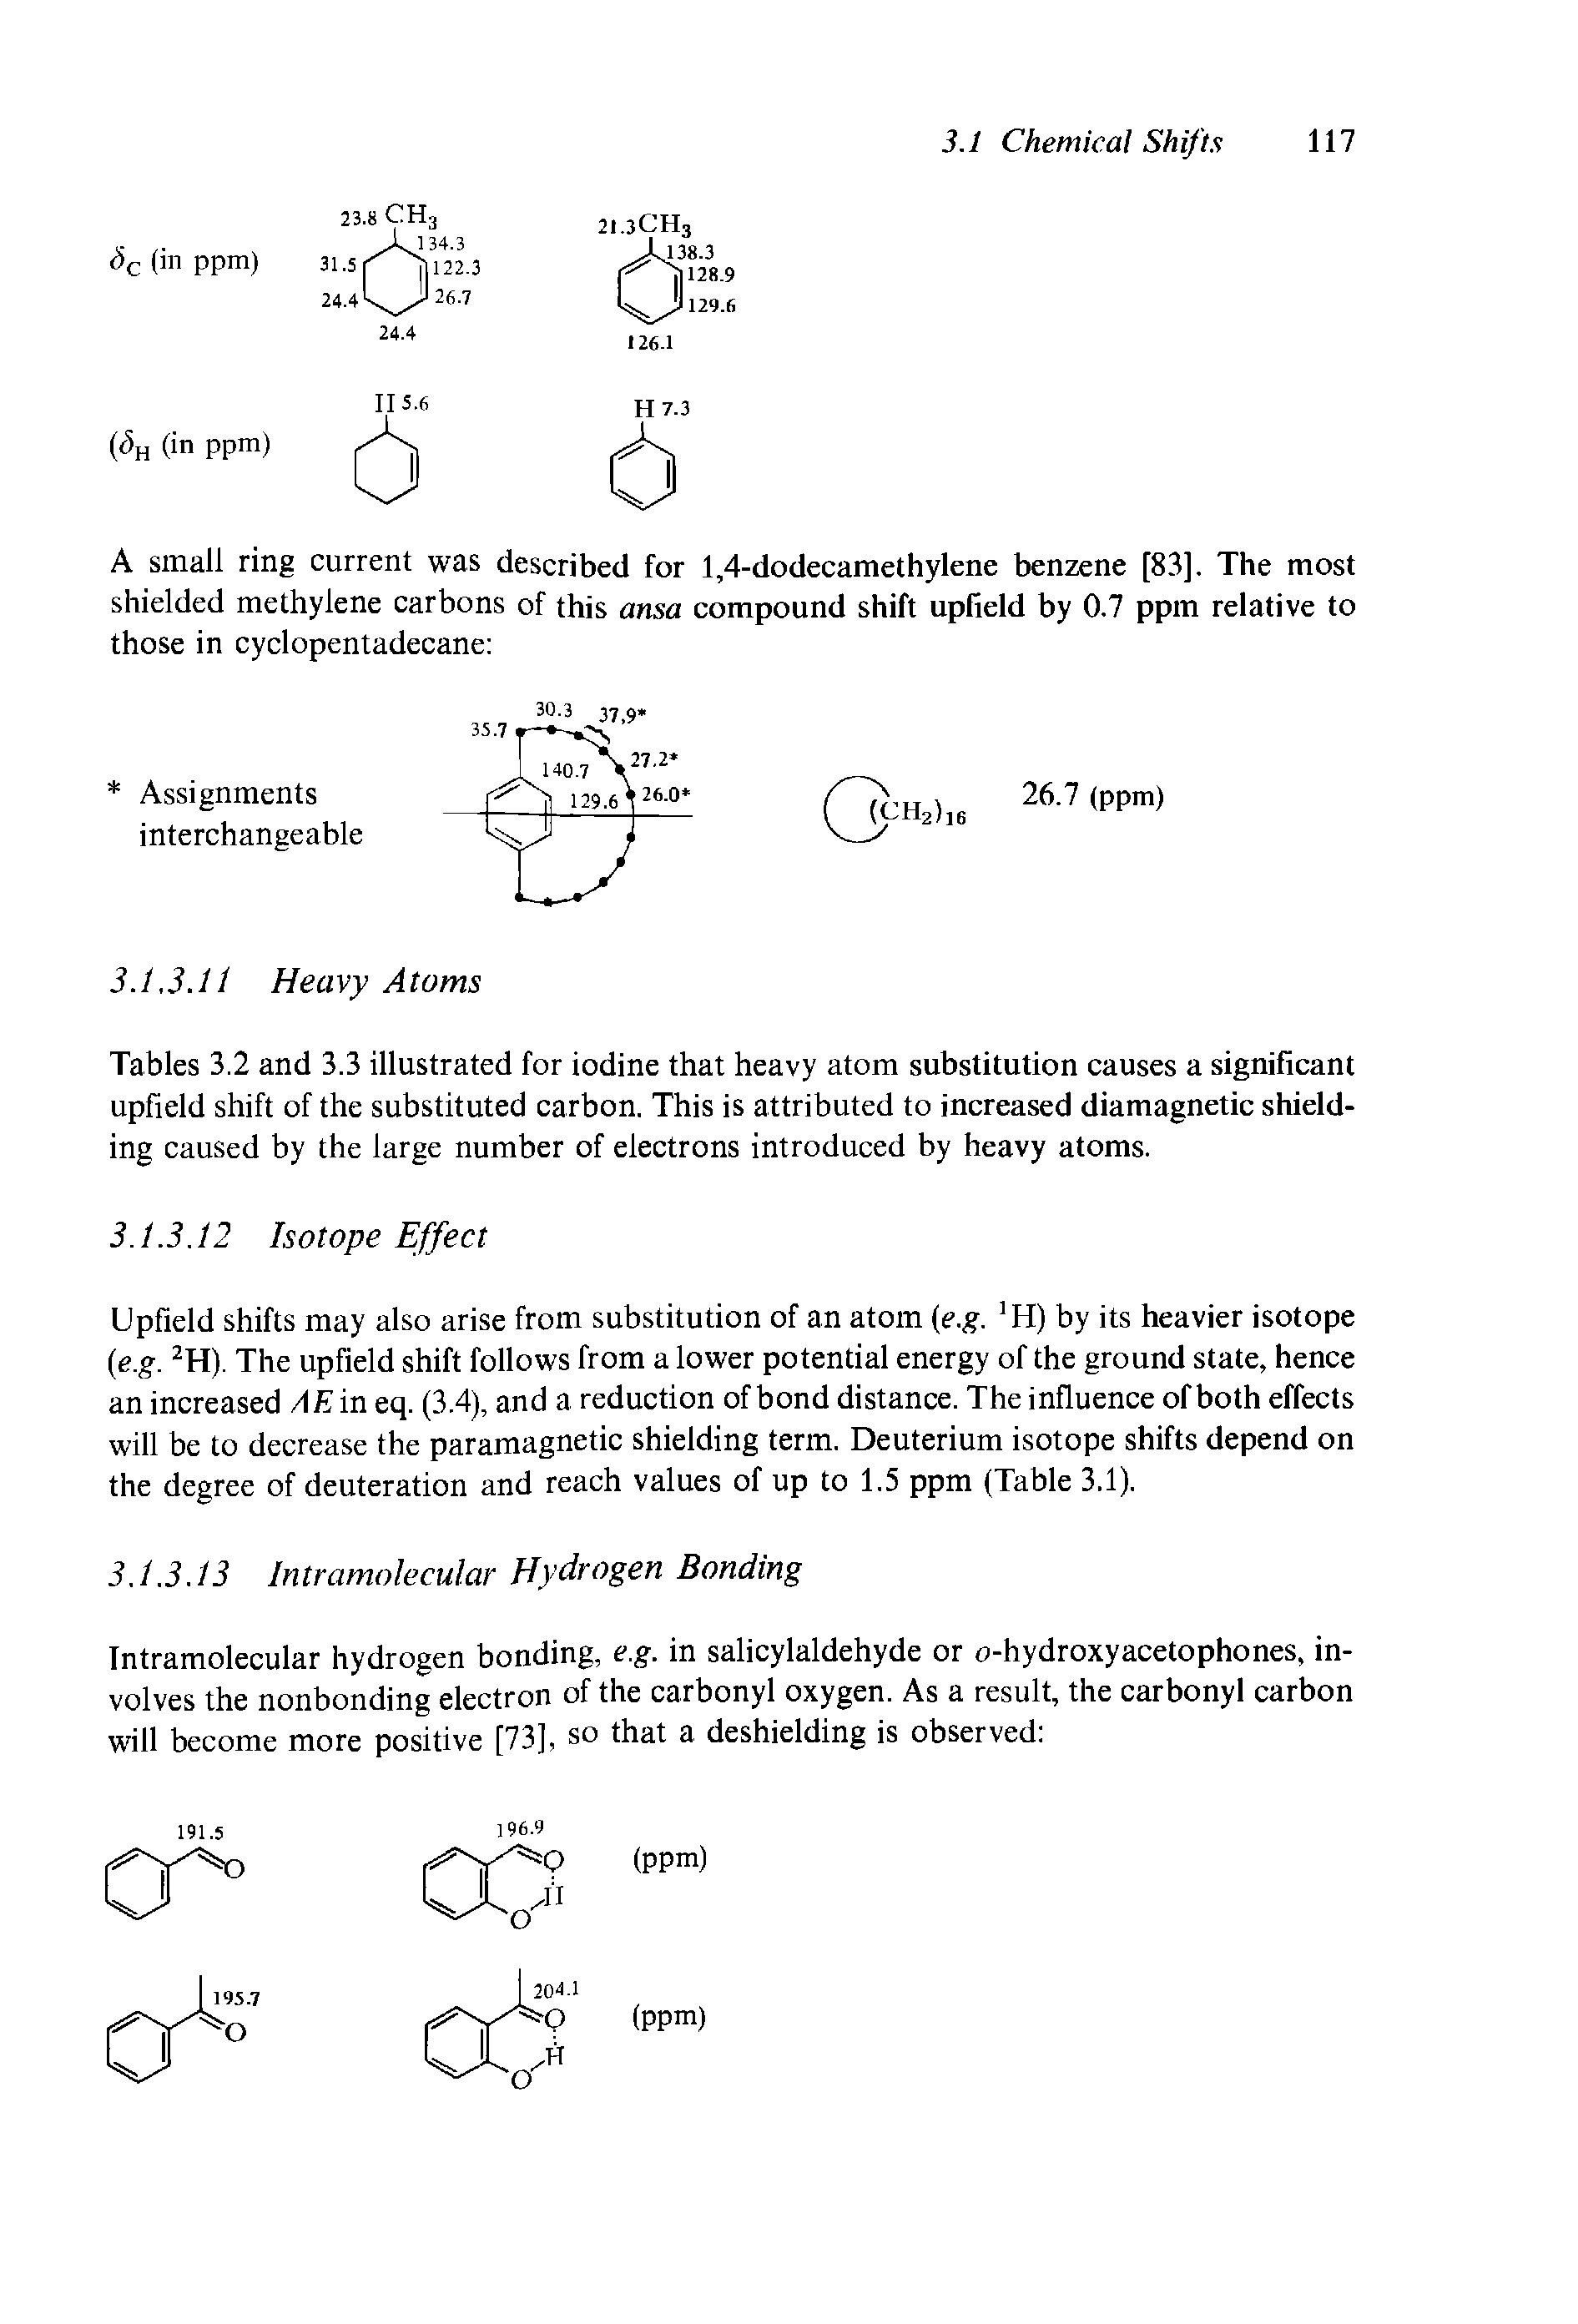 Tables 3.2 and 3.3 illustrated for iodine that heavy atom substitution causes a significant upheld shift of the substituted carbon. This is attributed to increased diamagnetic shielding caused by the large number of electrons introduced by heavy atoms.